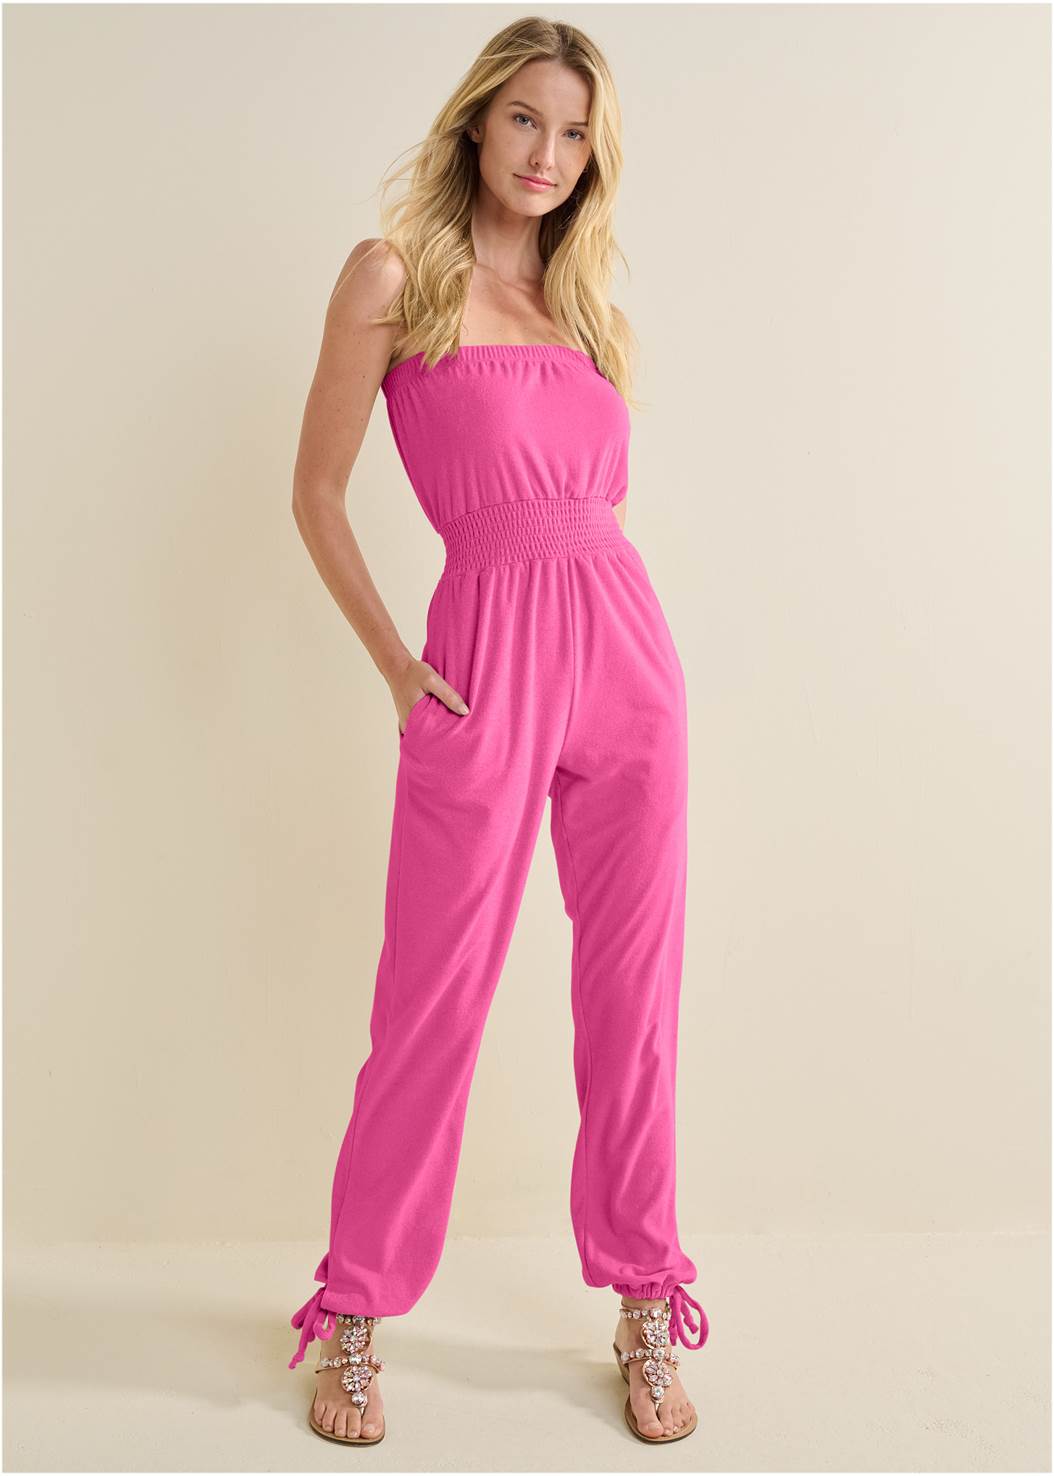 Terry towel jumpsuit in Pink